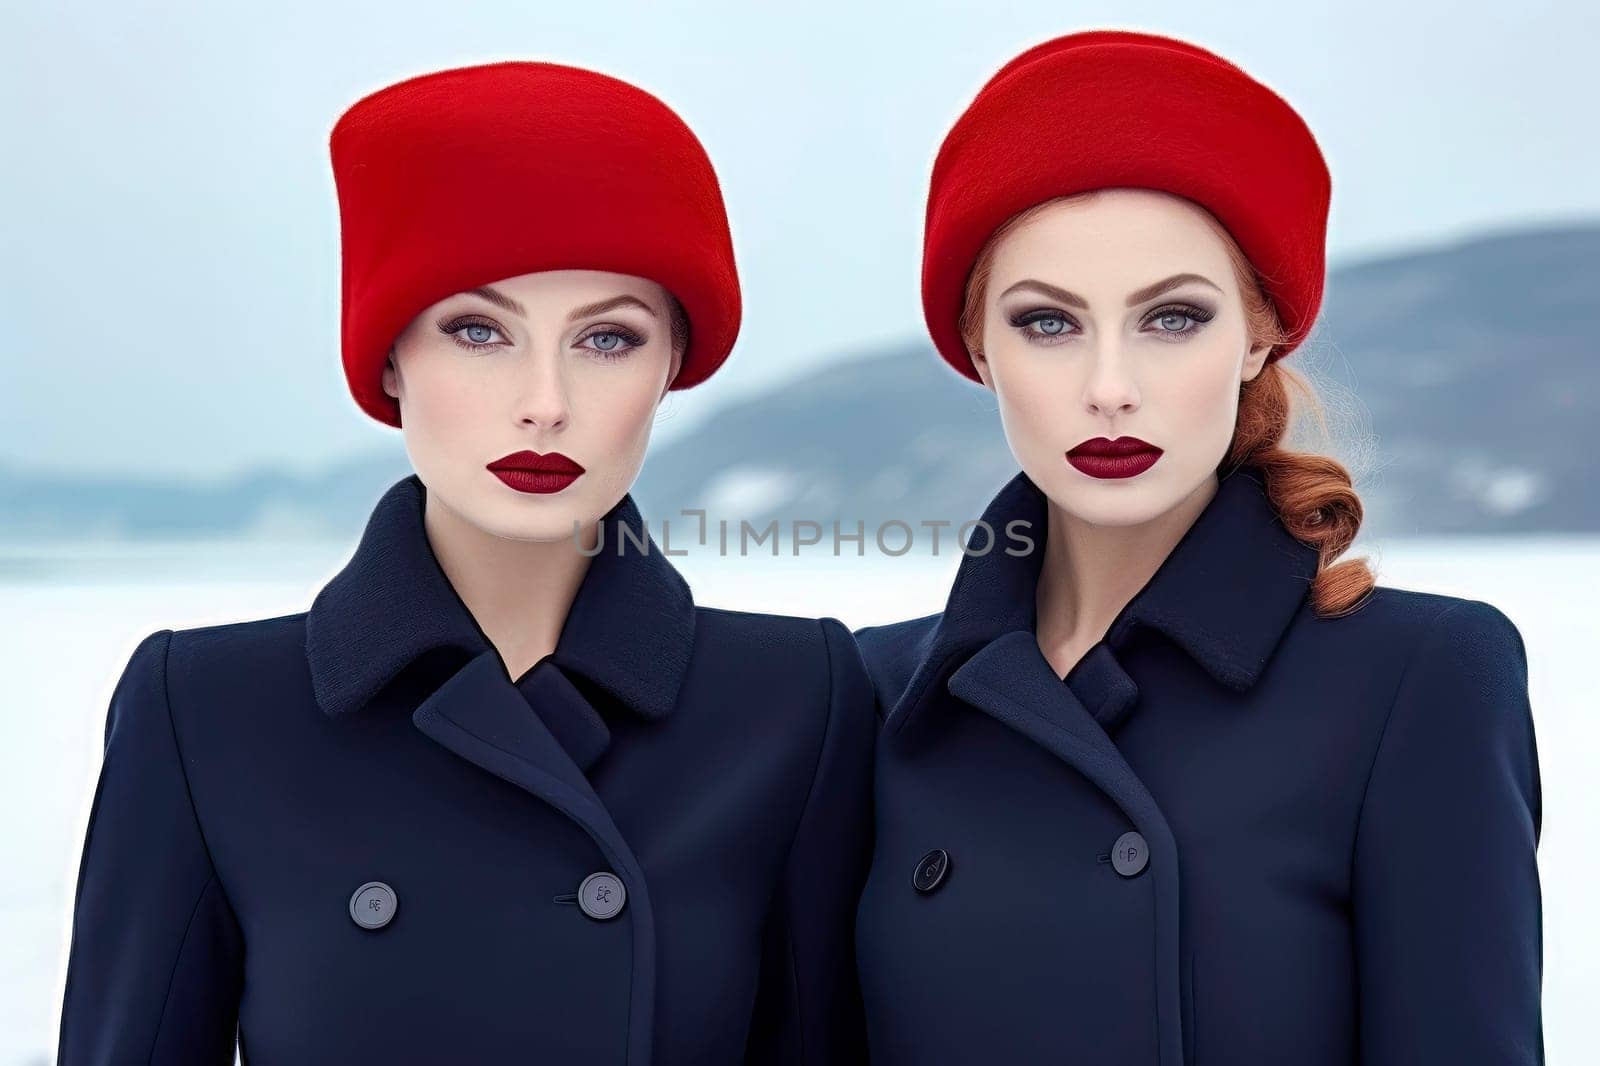 Portrait of twin Russian girls wearing distinctive red hats, showcasing their unique bond.